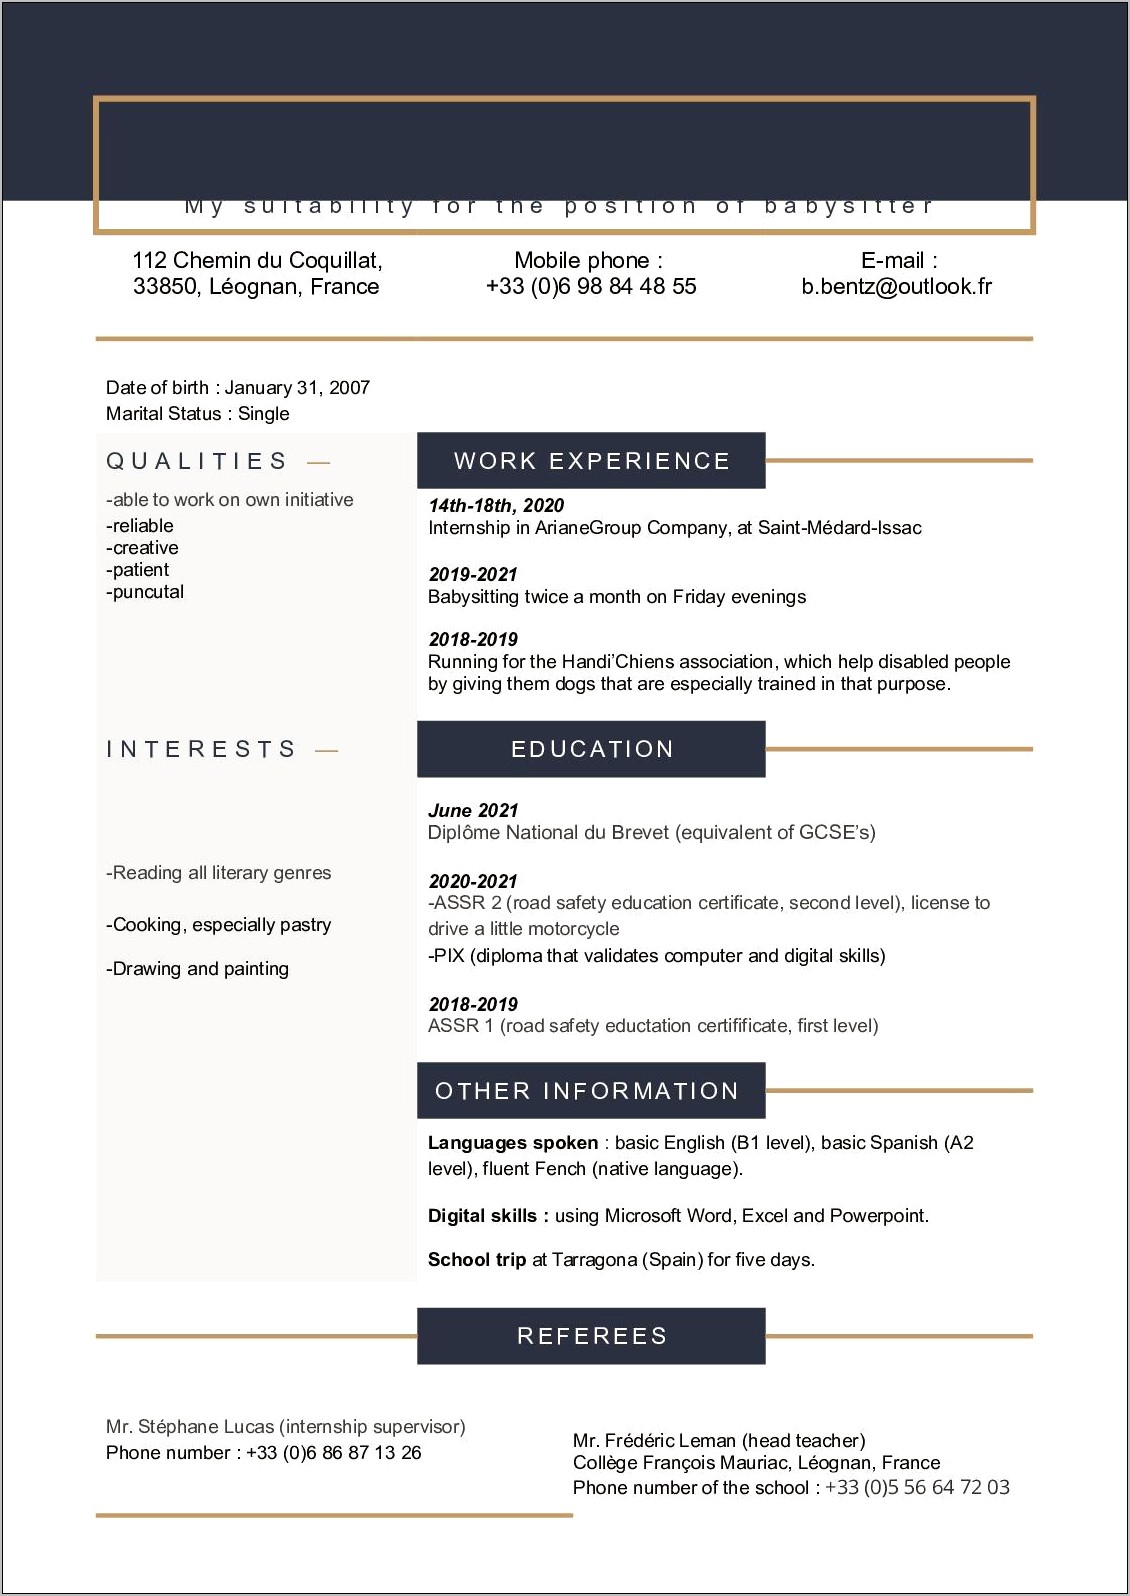 Resume Worked At Some Company Twice